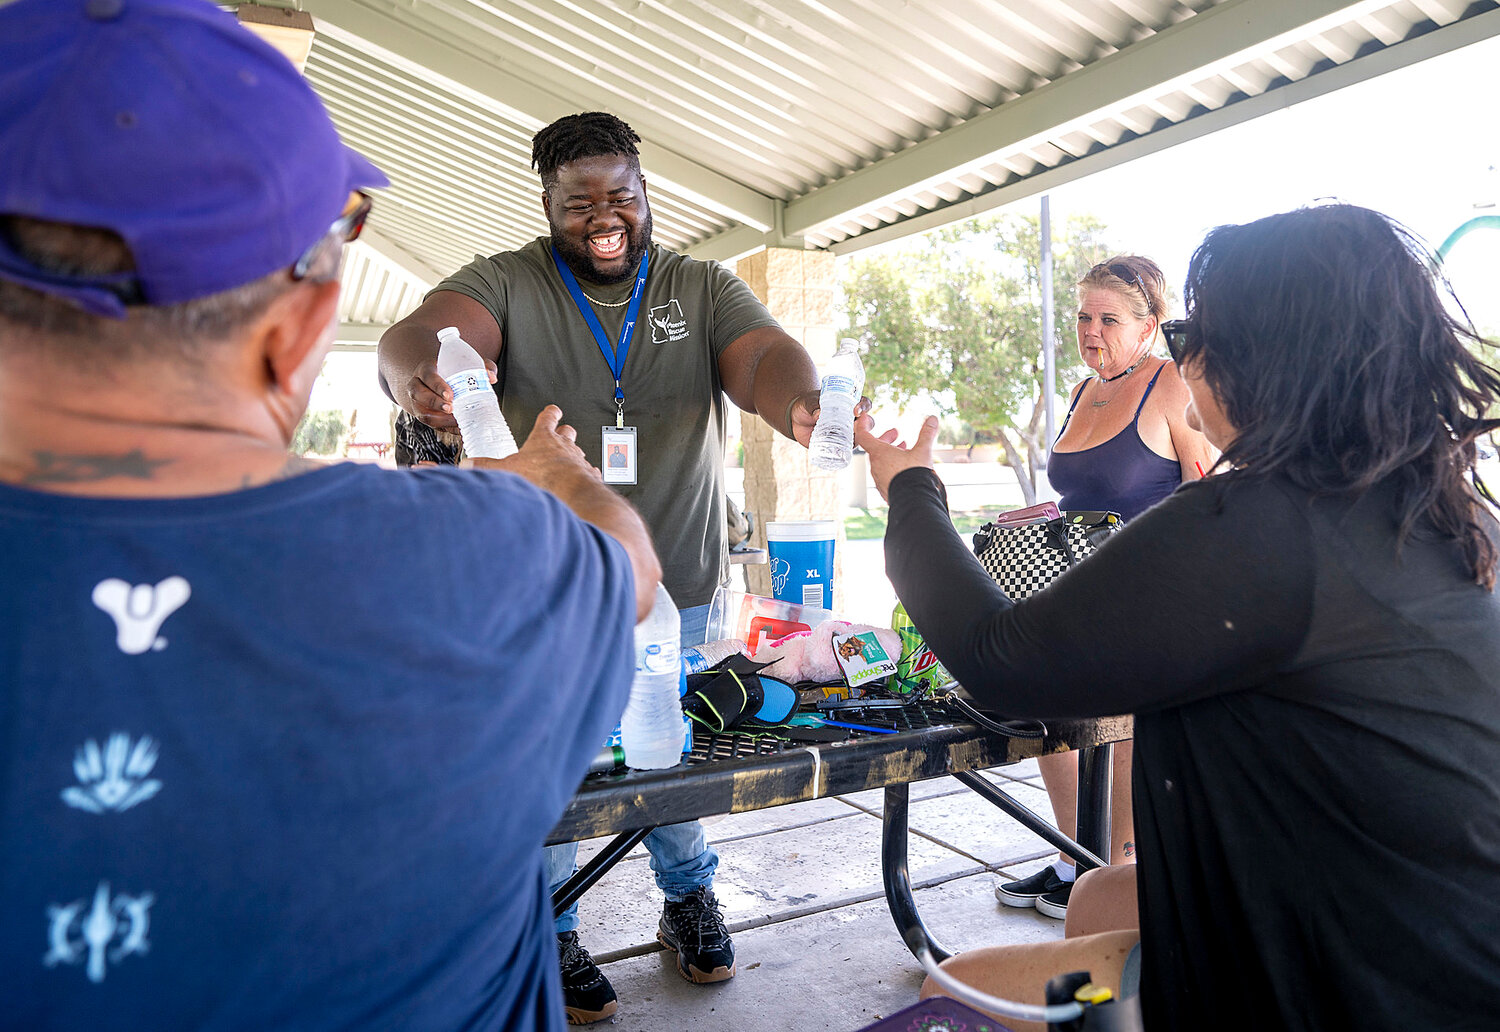 Hundreds of churches, businesses, and community members donated cases of water and critical funding and supplies to aid the unsheltered community this summer.